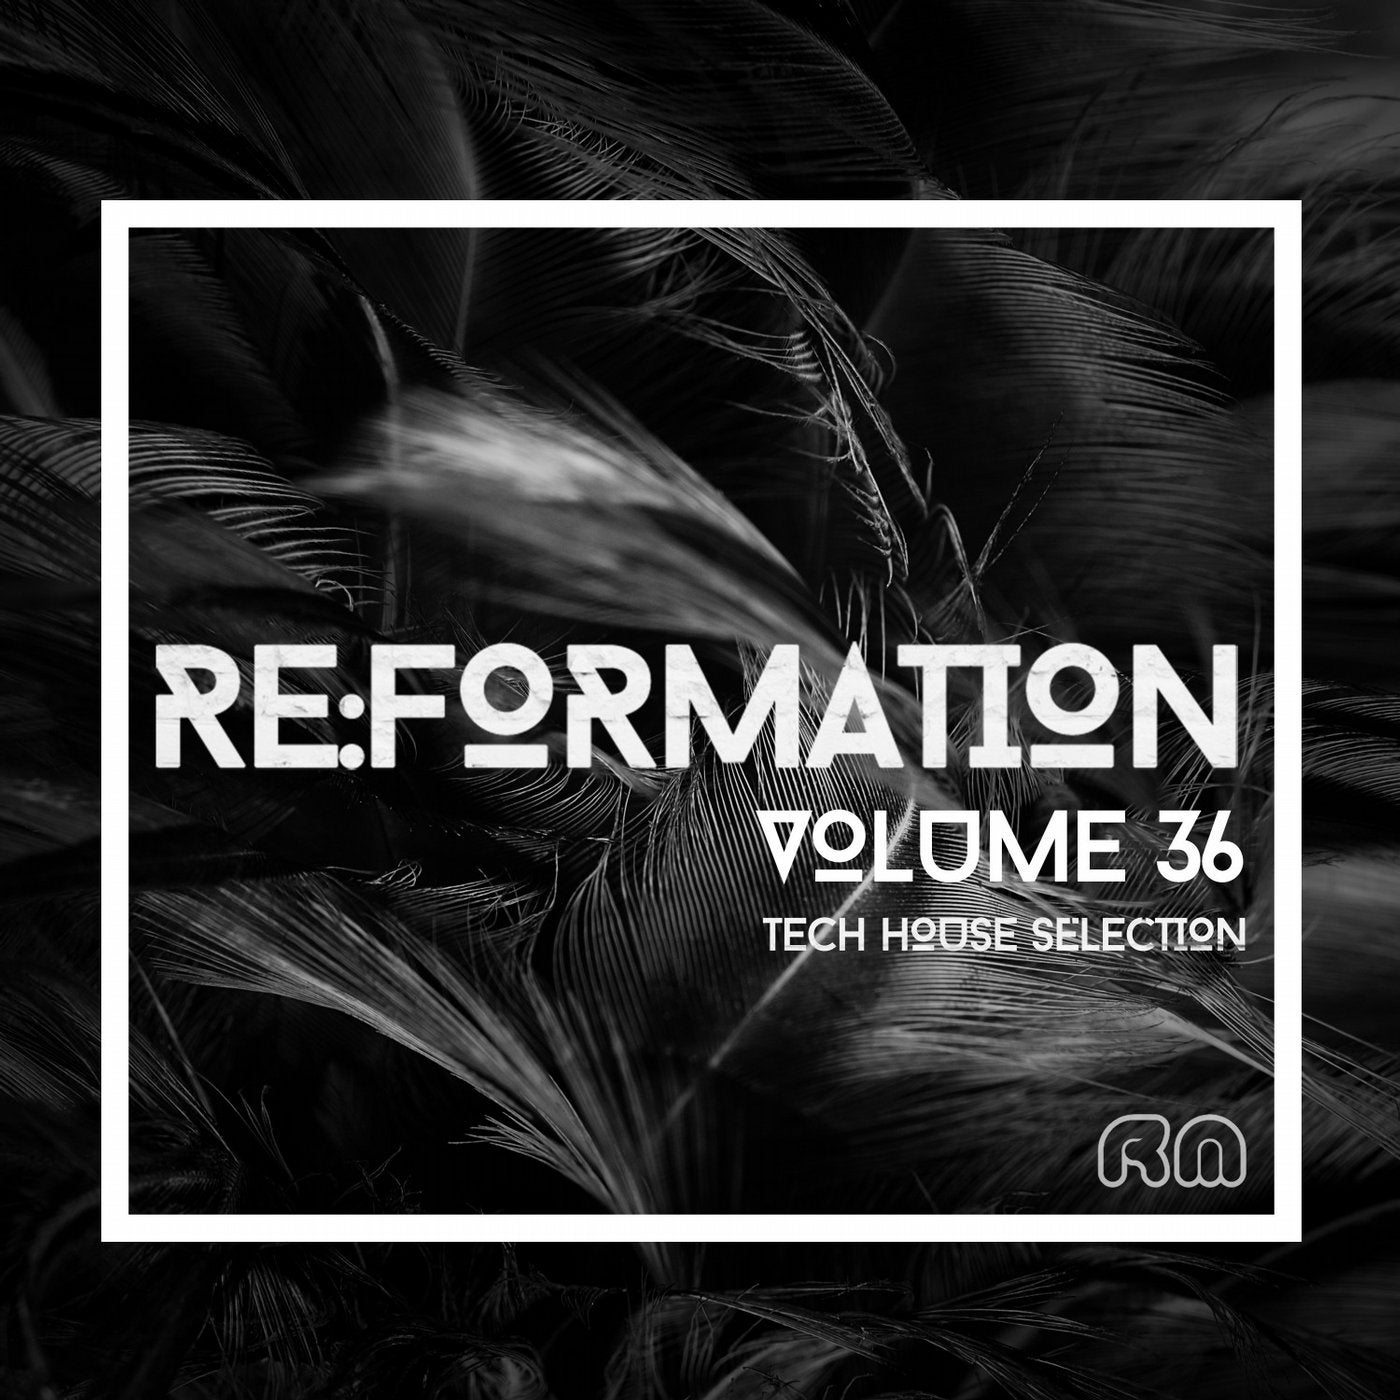 Re:Formation Vol. 36 - Tech House Selection